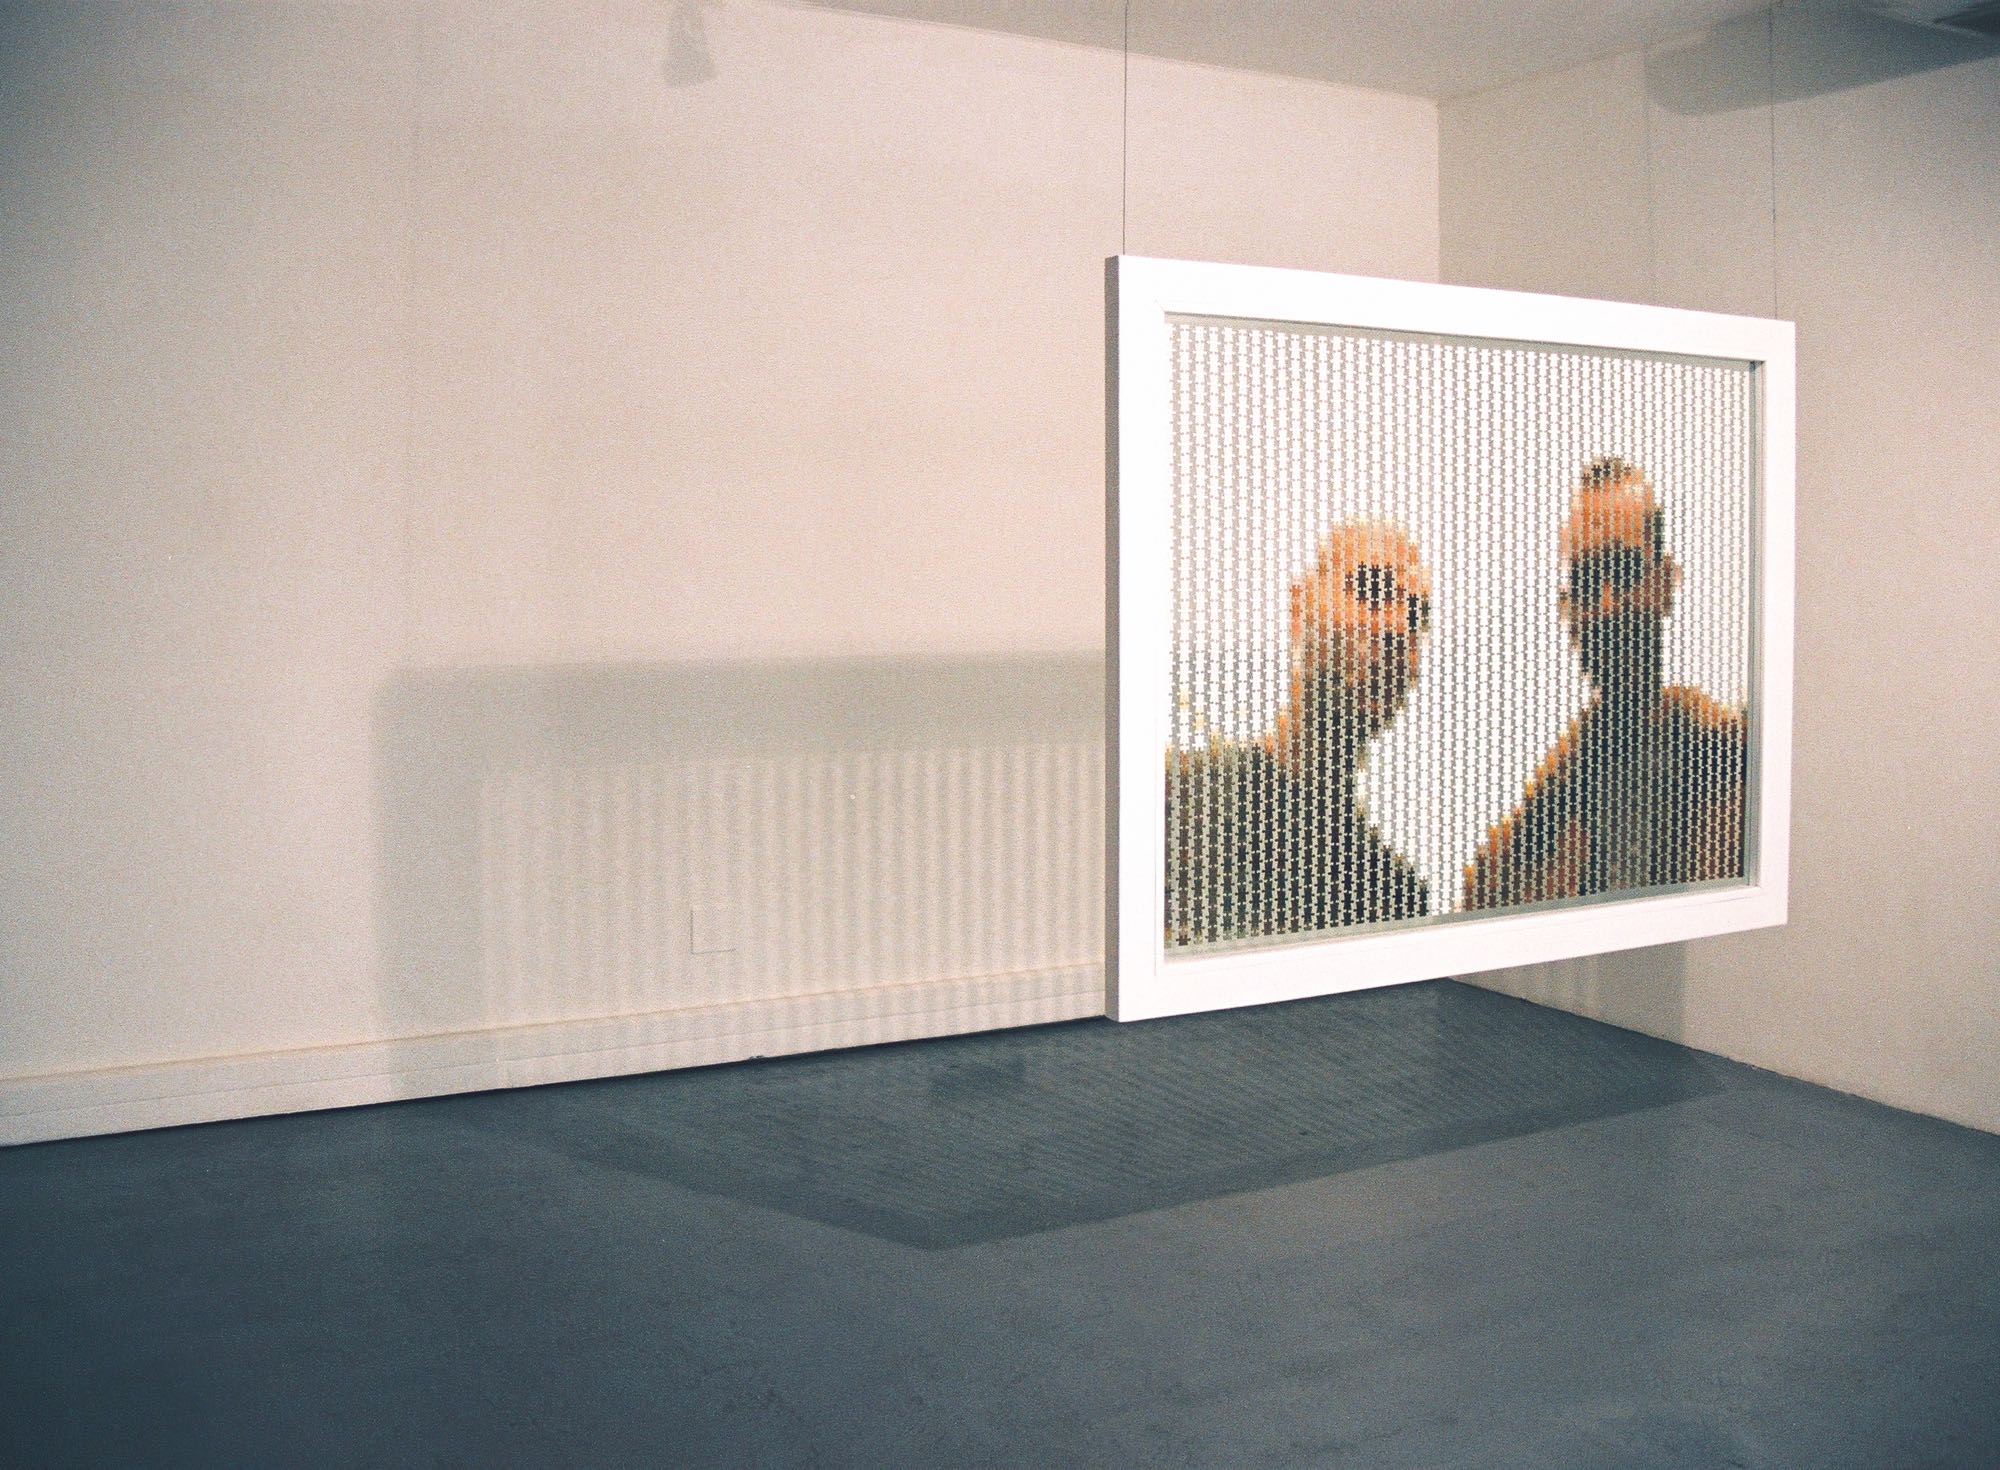  Pierre Fouché. The distance between us (2003). Acrylic on found cardboard puzzle, glass, pine, steel, cable wire. 135 x 185 x 6cm. Corporate Collection.